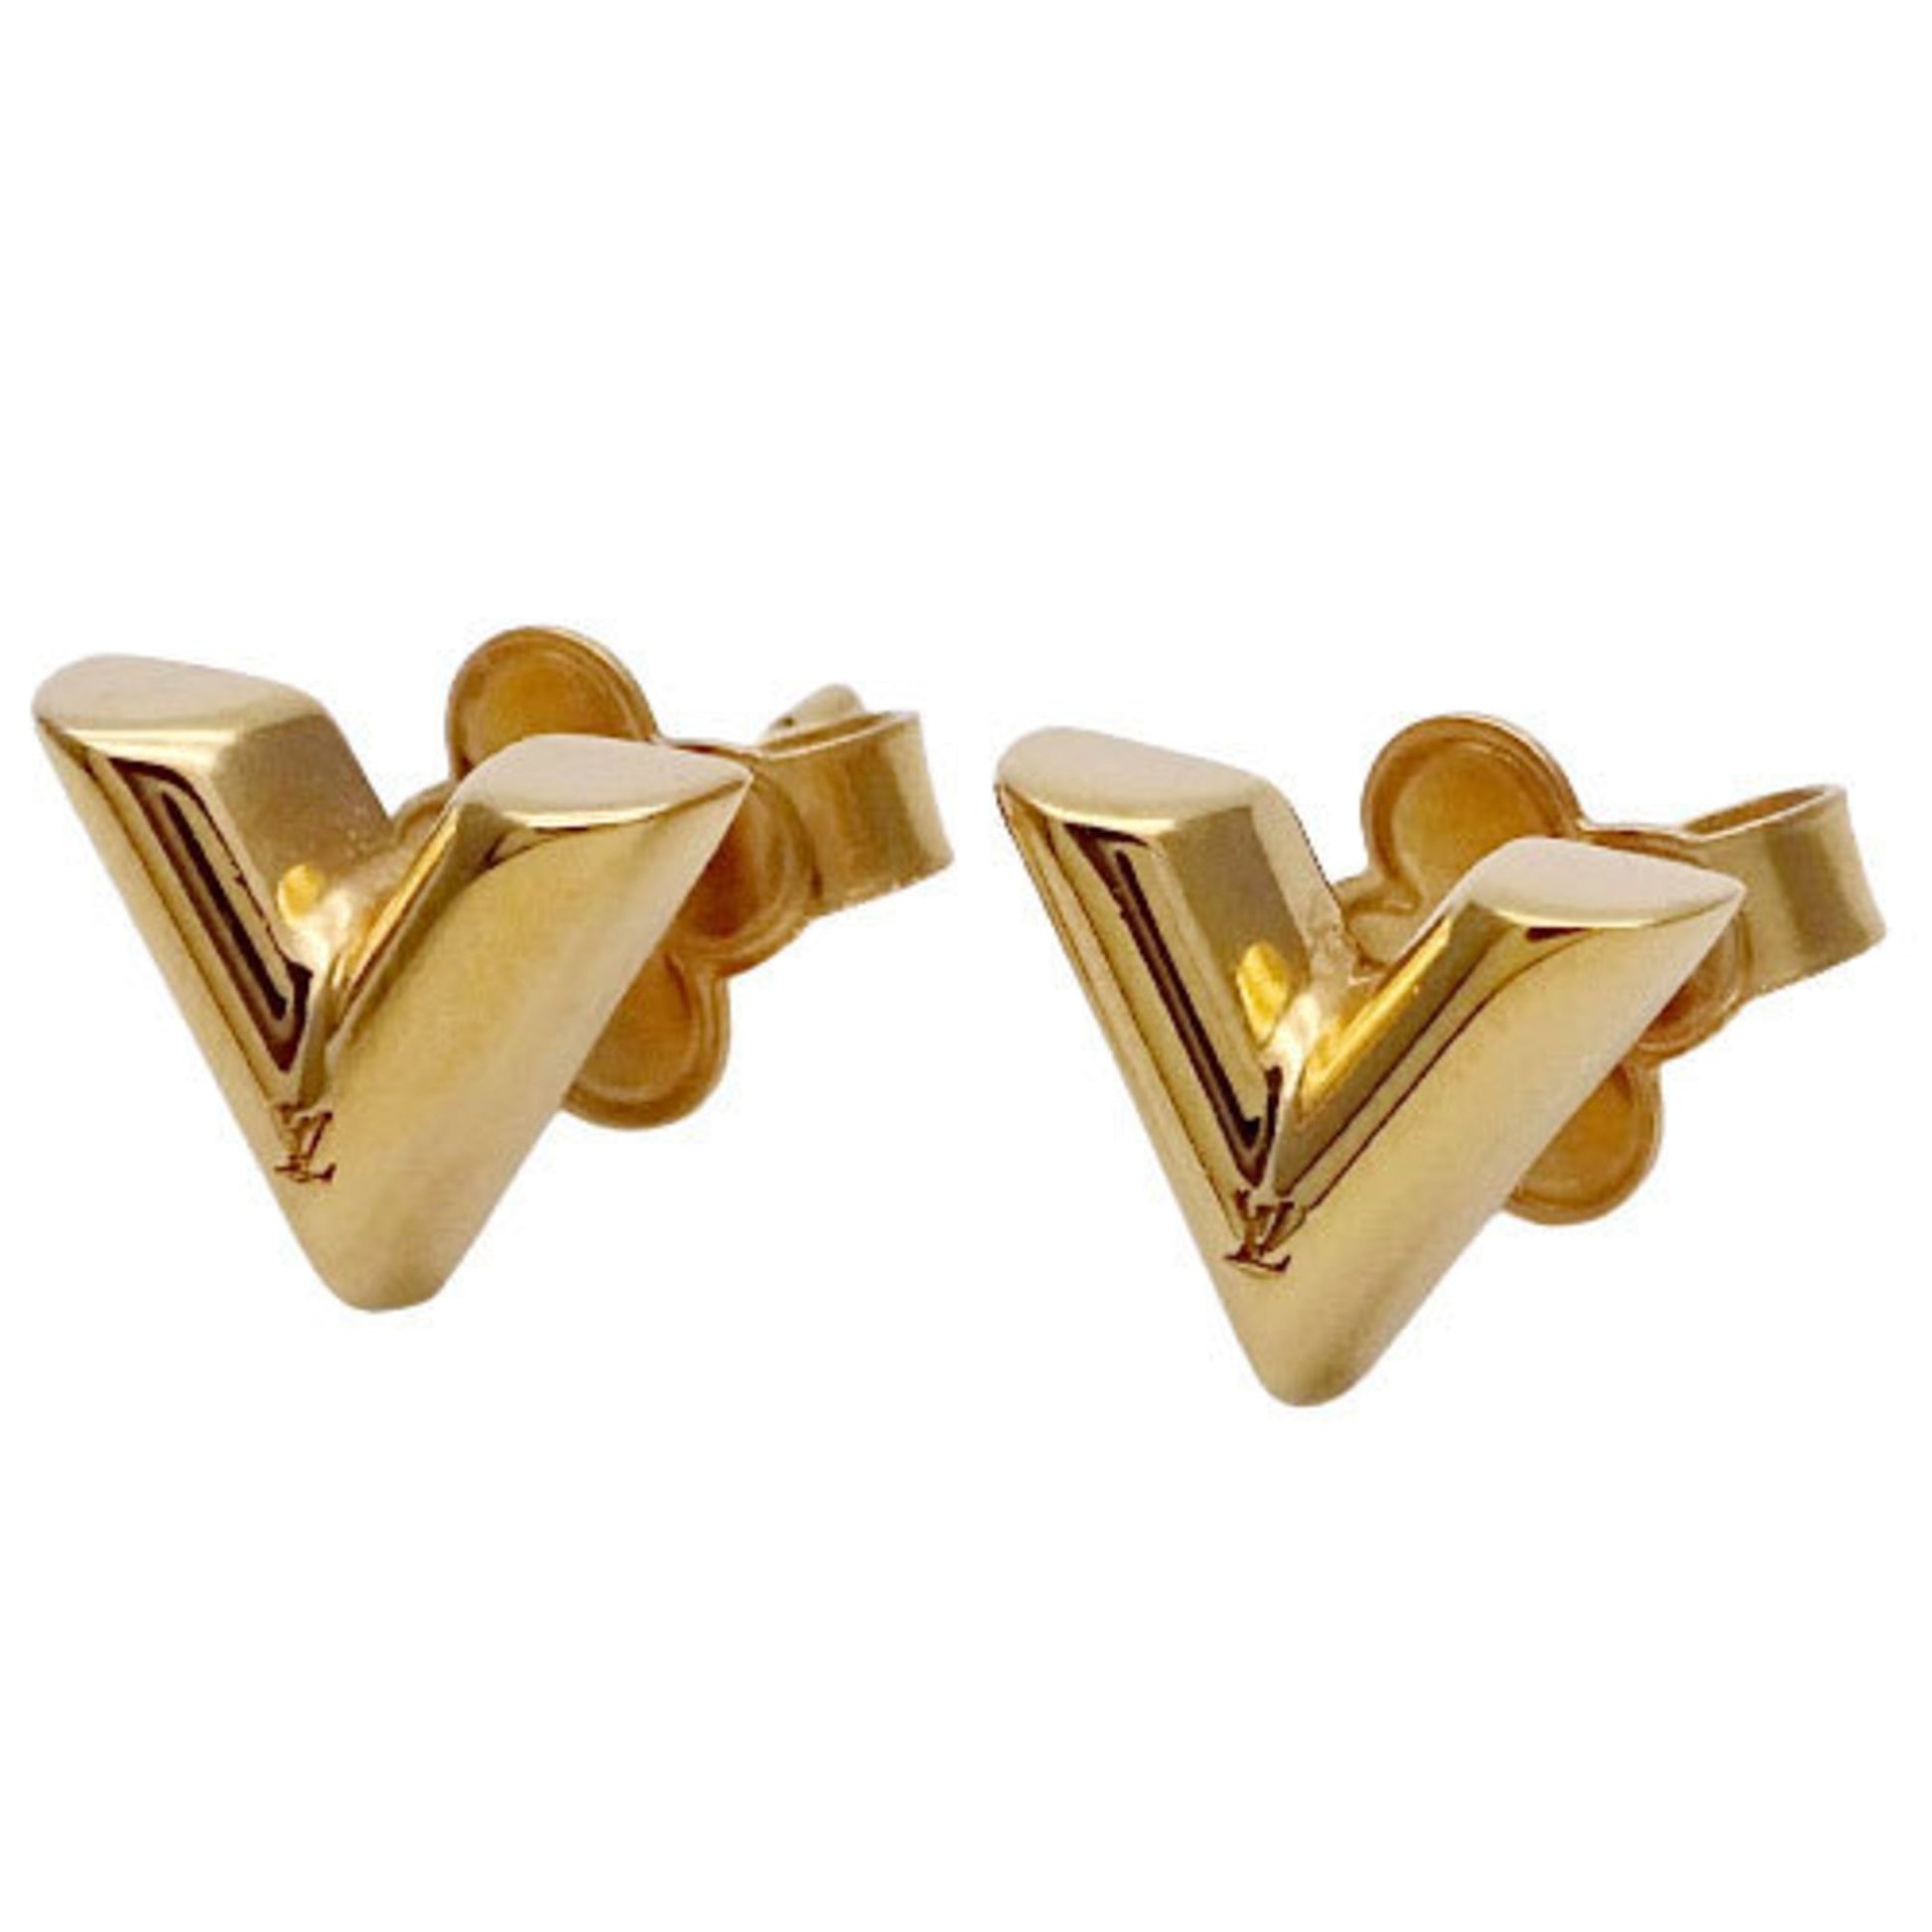 Authenticated used Louis Vuitton Earrings Essential V Gold Metal Material M68153, Adult Unisex, Size: One Size